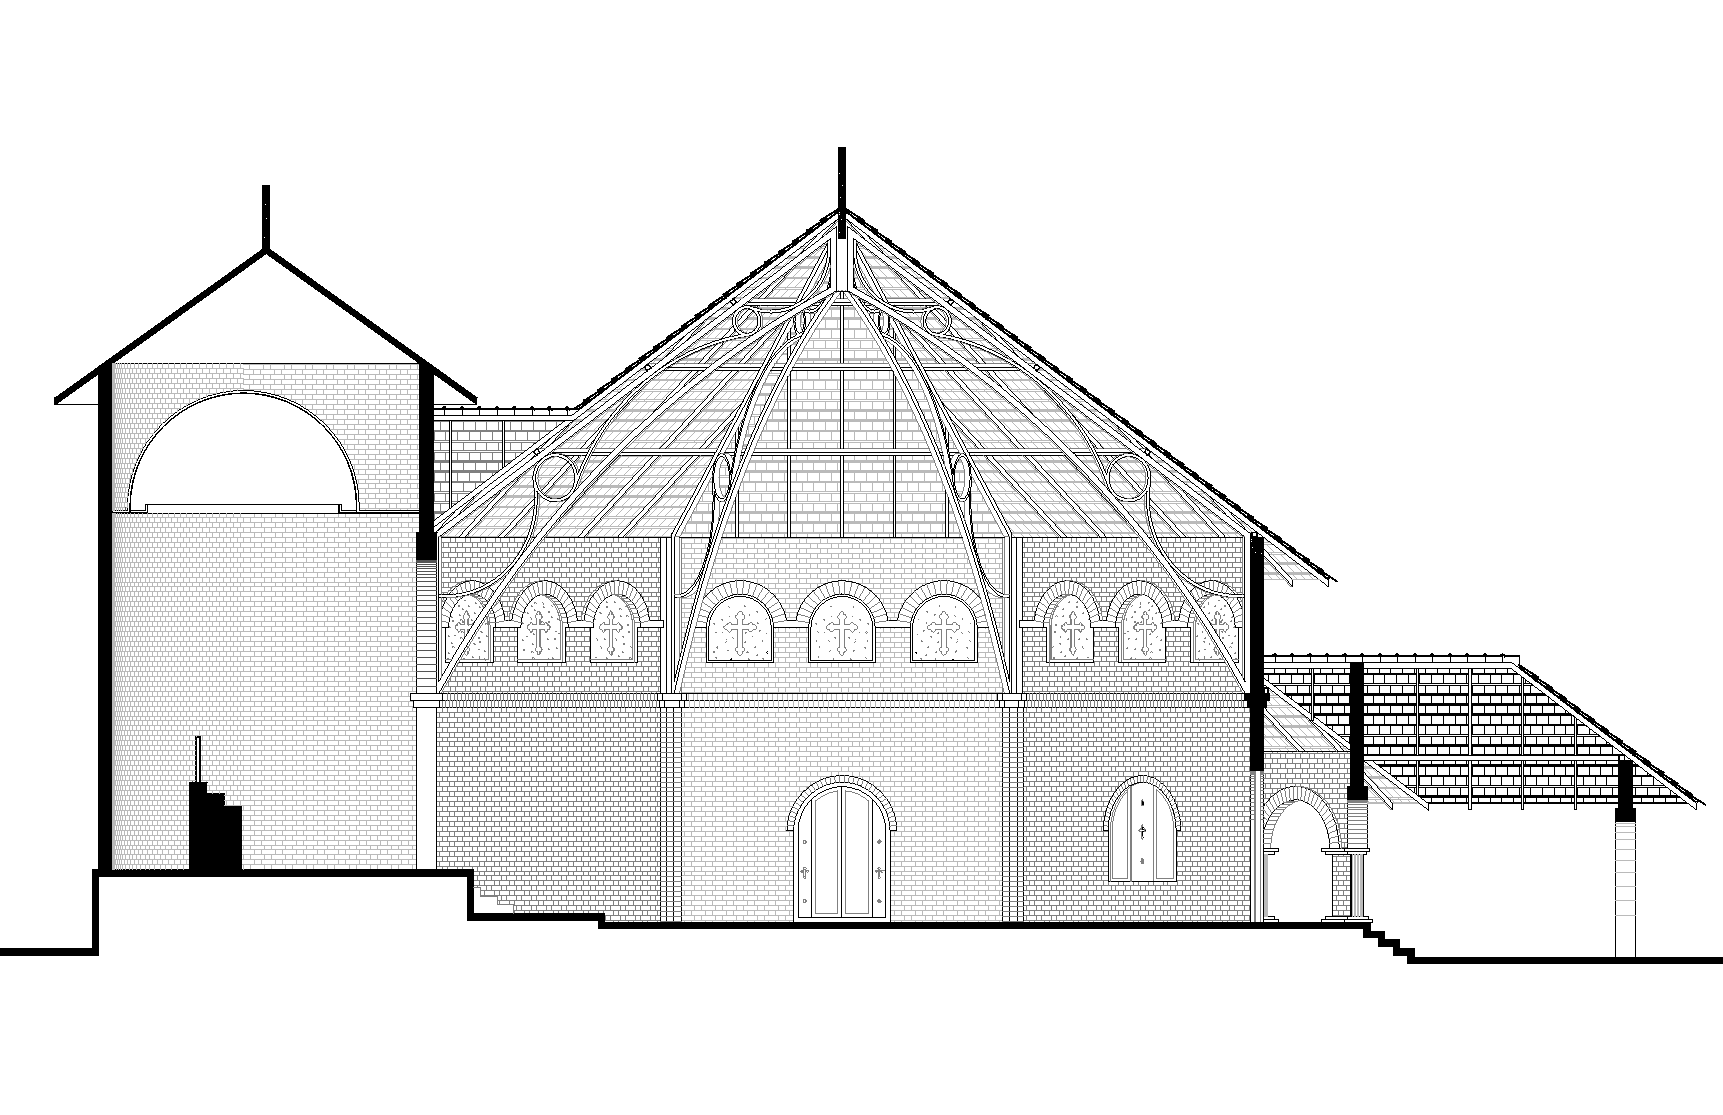 Longitudinal Section of The Lord's House